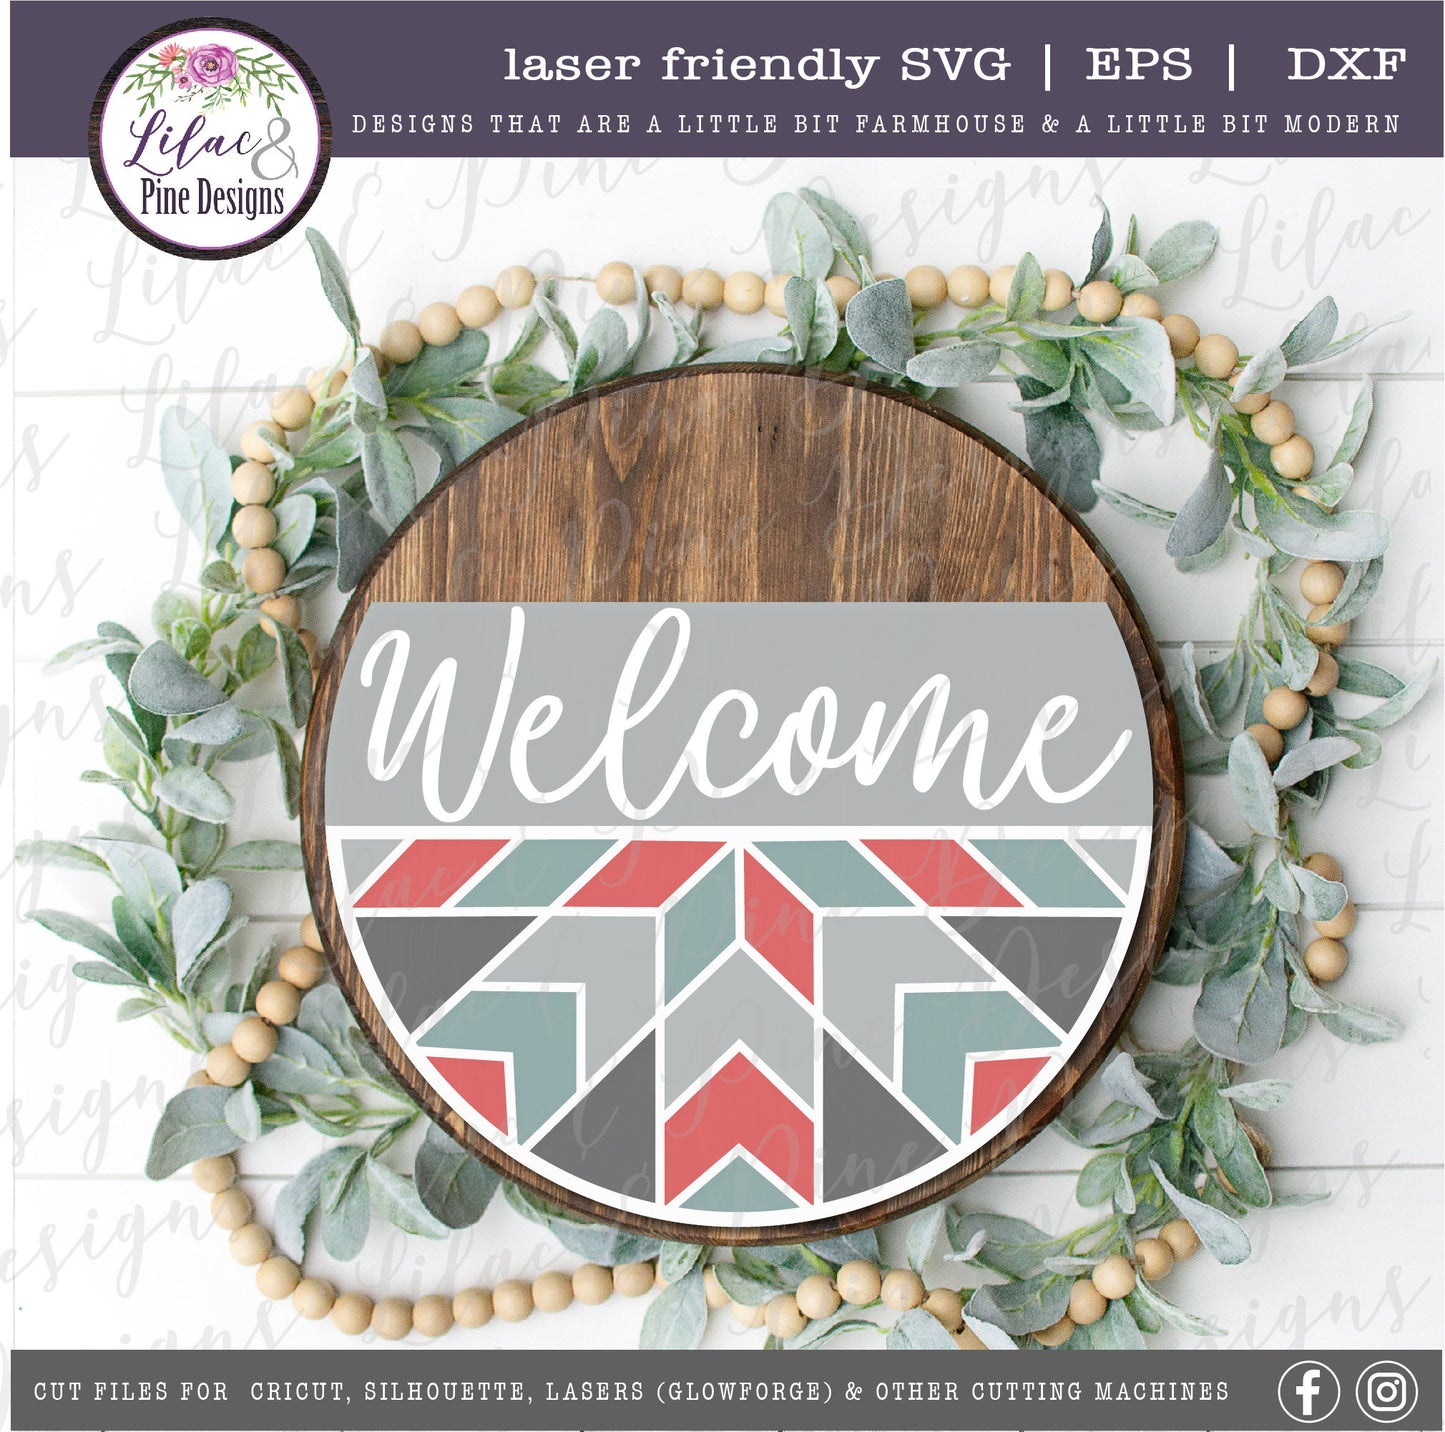 Welcome stained glass quilt round, quilt lover SVG, Welcome SVG, front door decor, round wood sign, geometric, Glowforge Svg, laser cut file